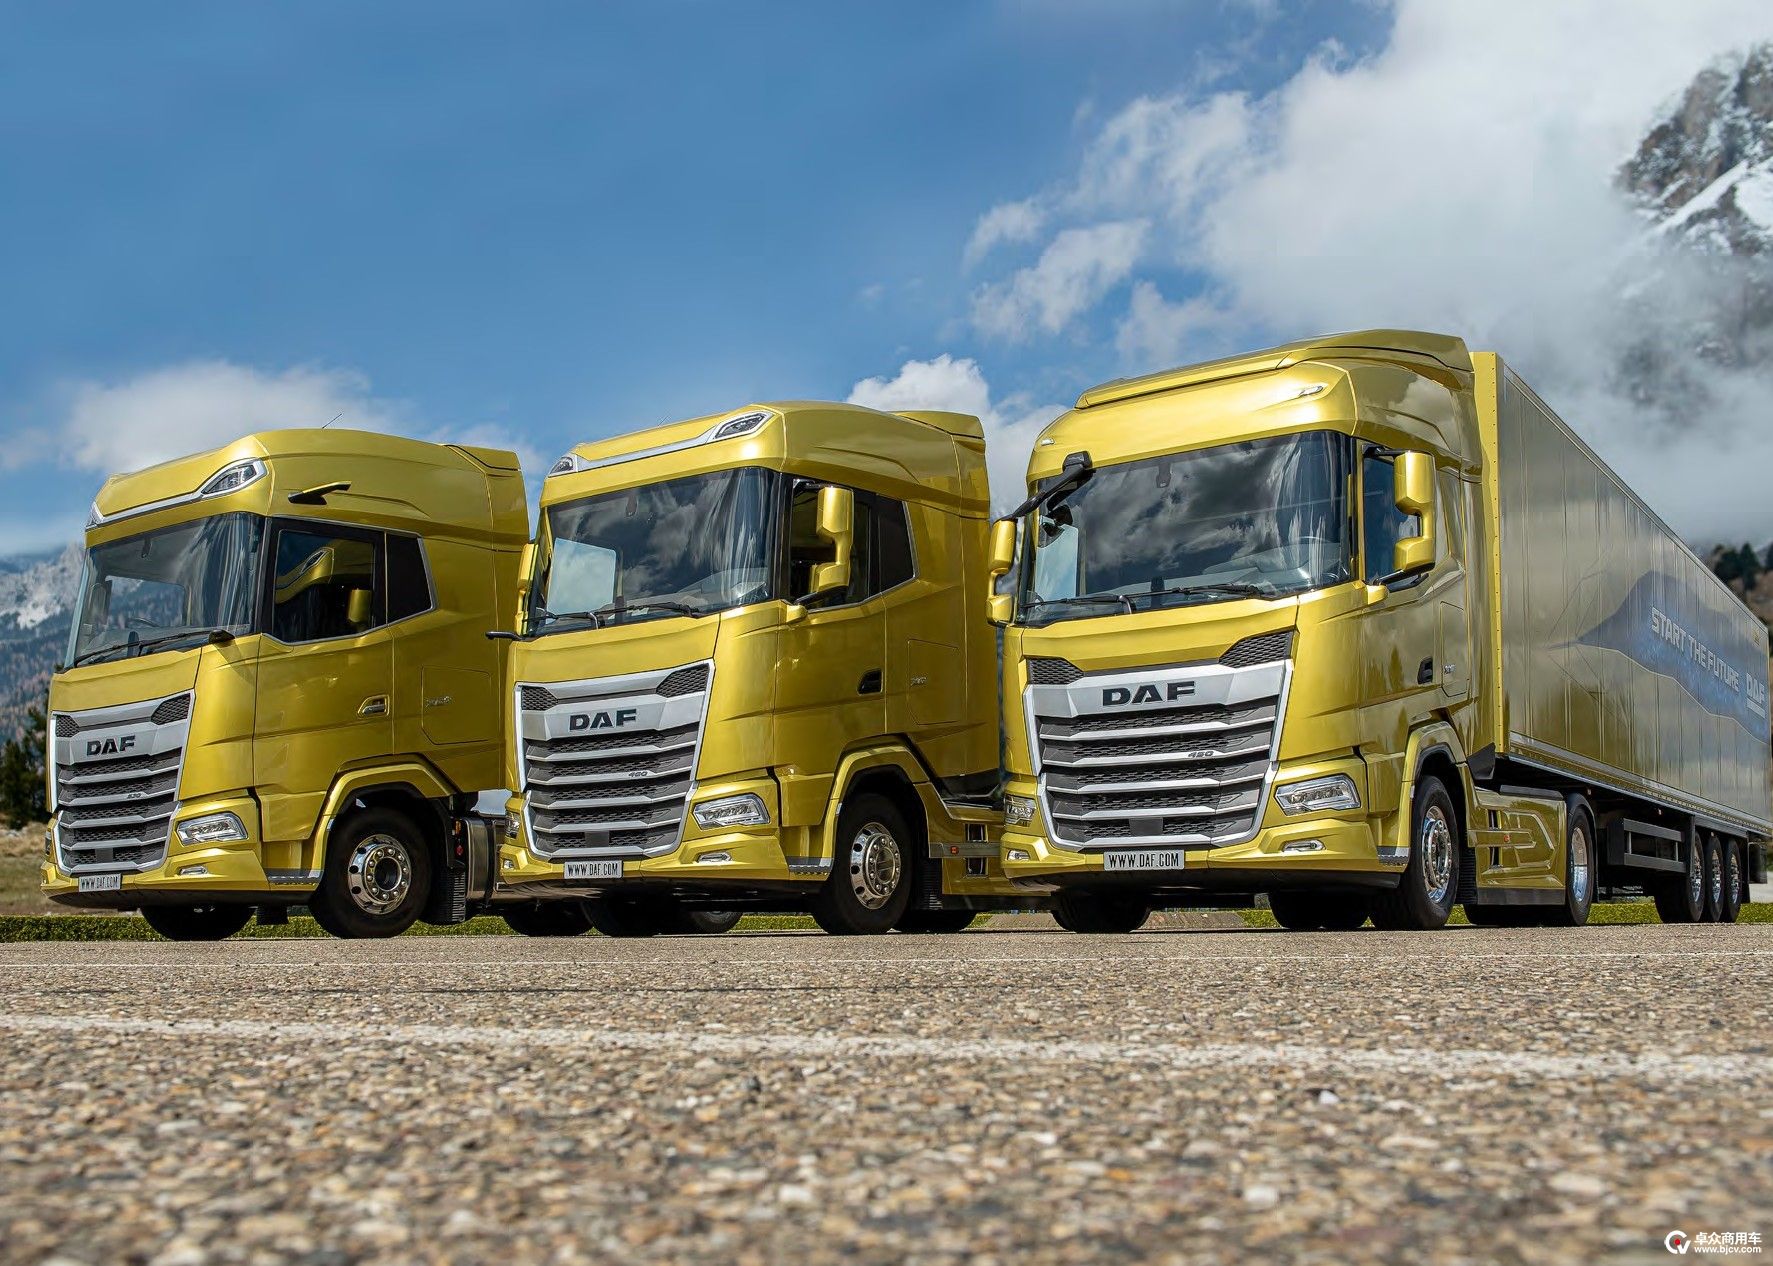 Number One in - DAF Trucks  Number One in Drive Comfort. The New  Generation DAF XF, XG and XG⁺ are crowned 'International Truck of the  Year'. Learn more about their superb